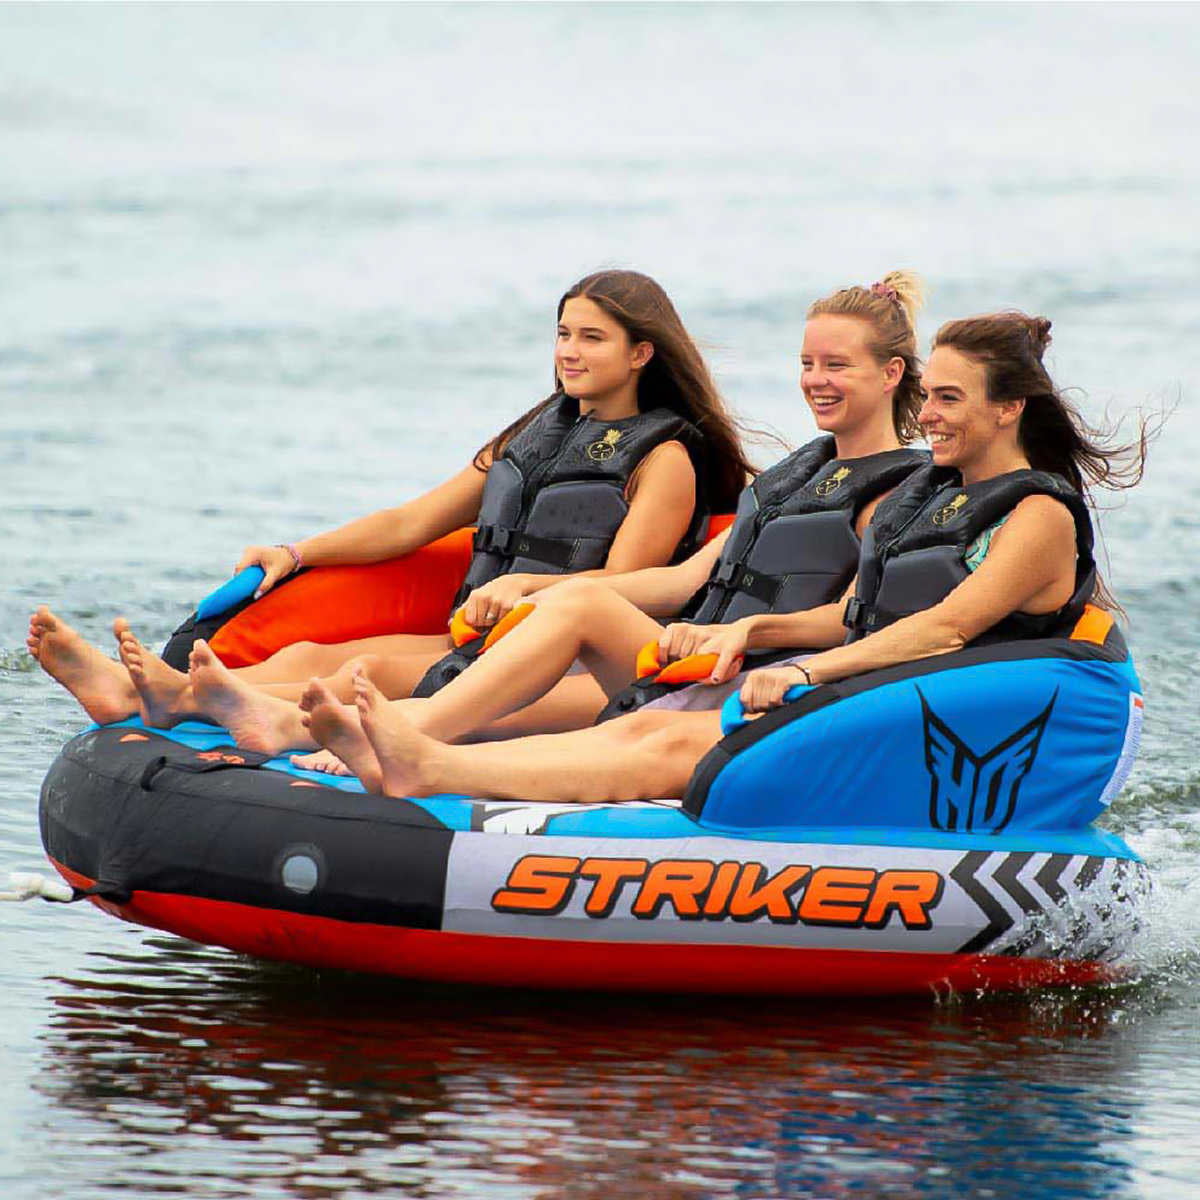 Towable Tube Inflatable 3 Person Boat Raft Water Sports Ride Tubing Boating New 